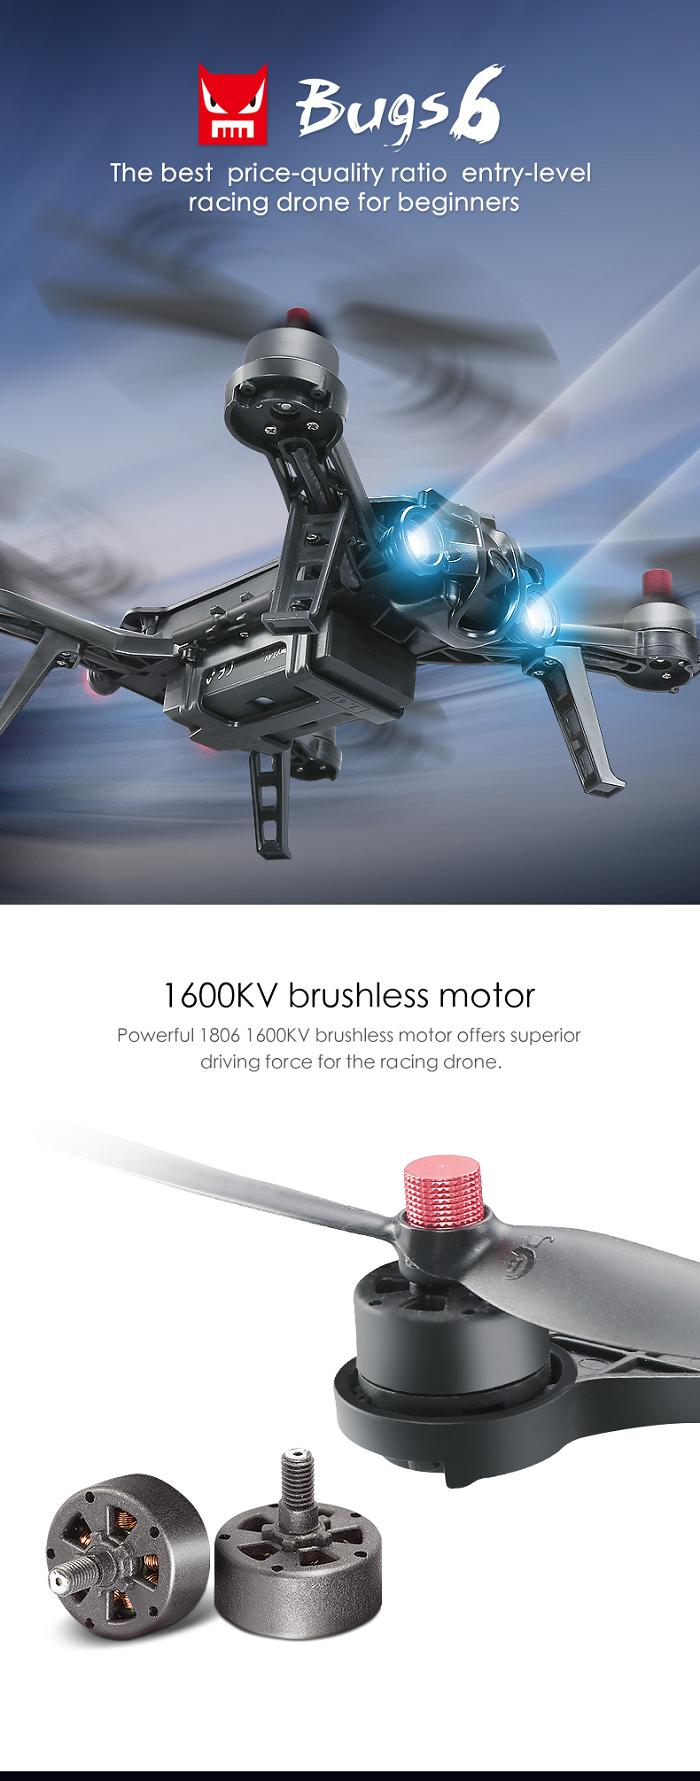 MJX-B6-Bugs-6-Brushless-with-LED-Light-3D-Roll-Racing-Drone-RC-Quadcopter-RTF-1148467-1